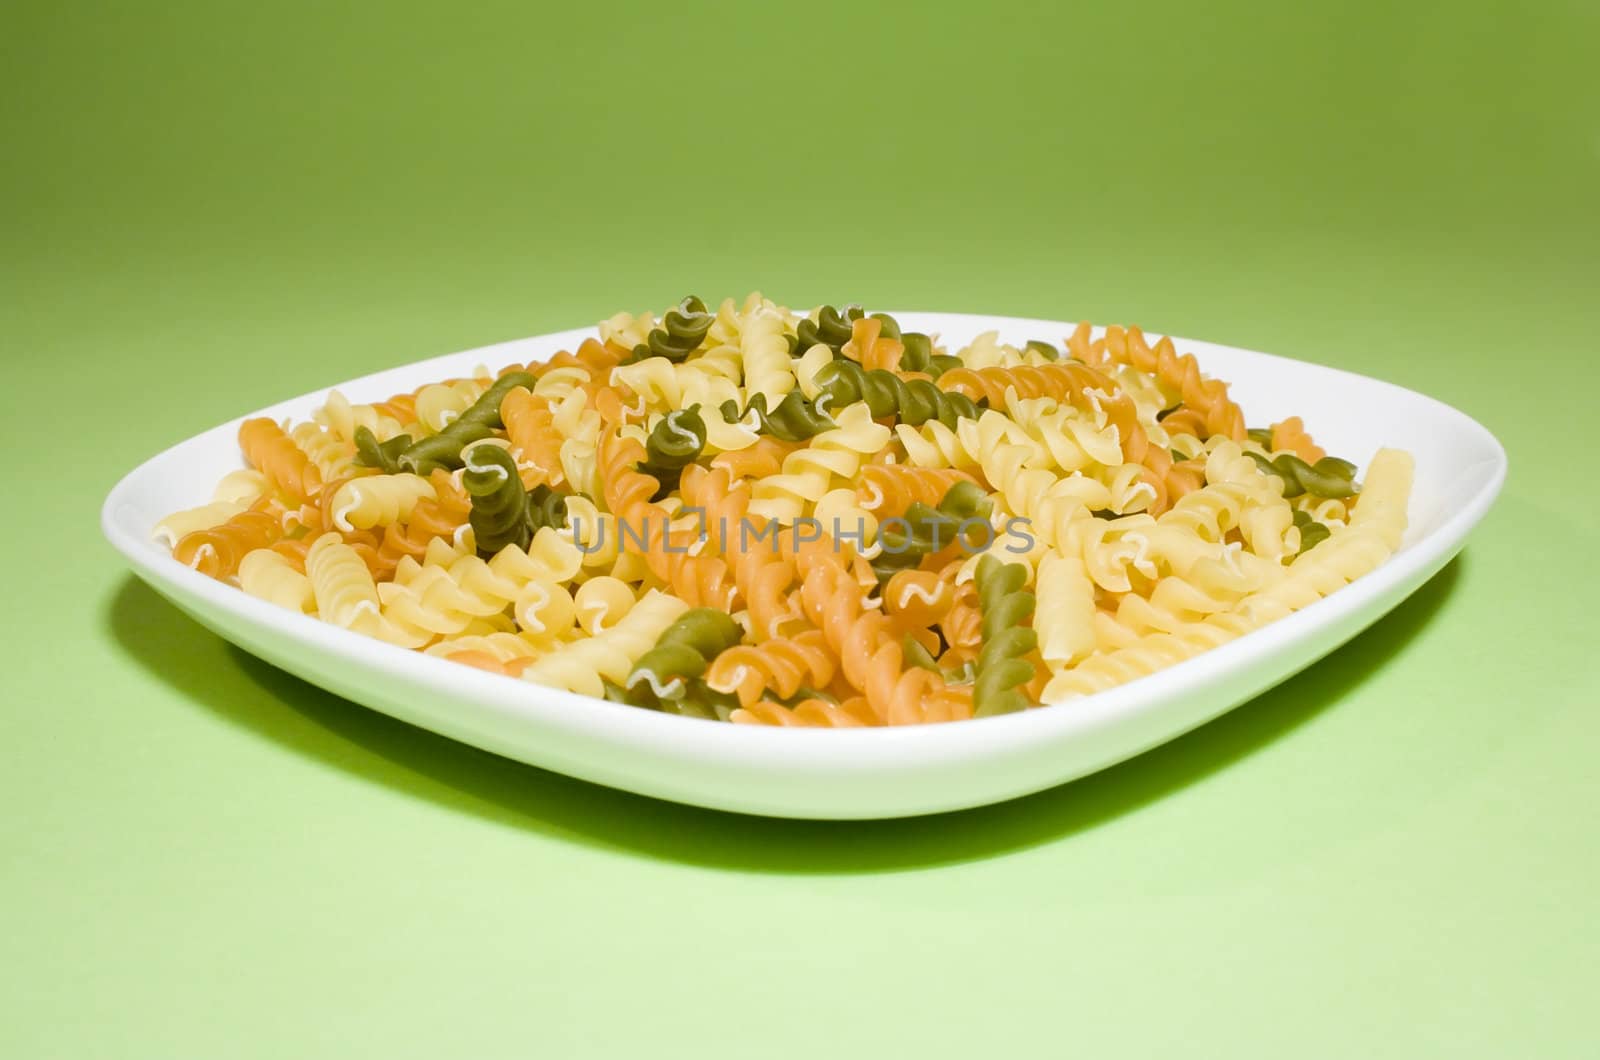 Pasta on green background by orson